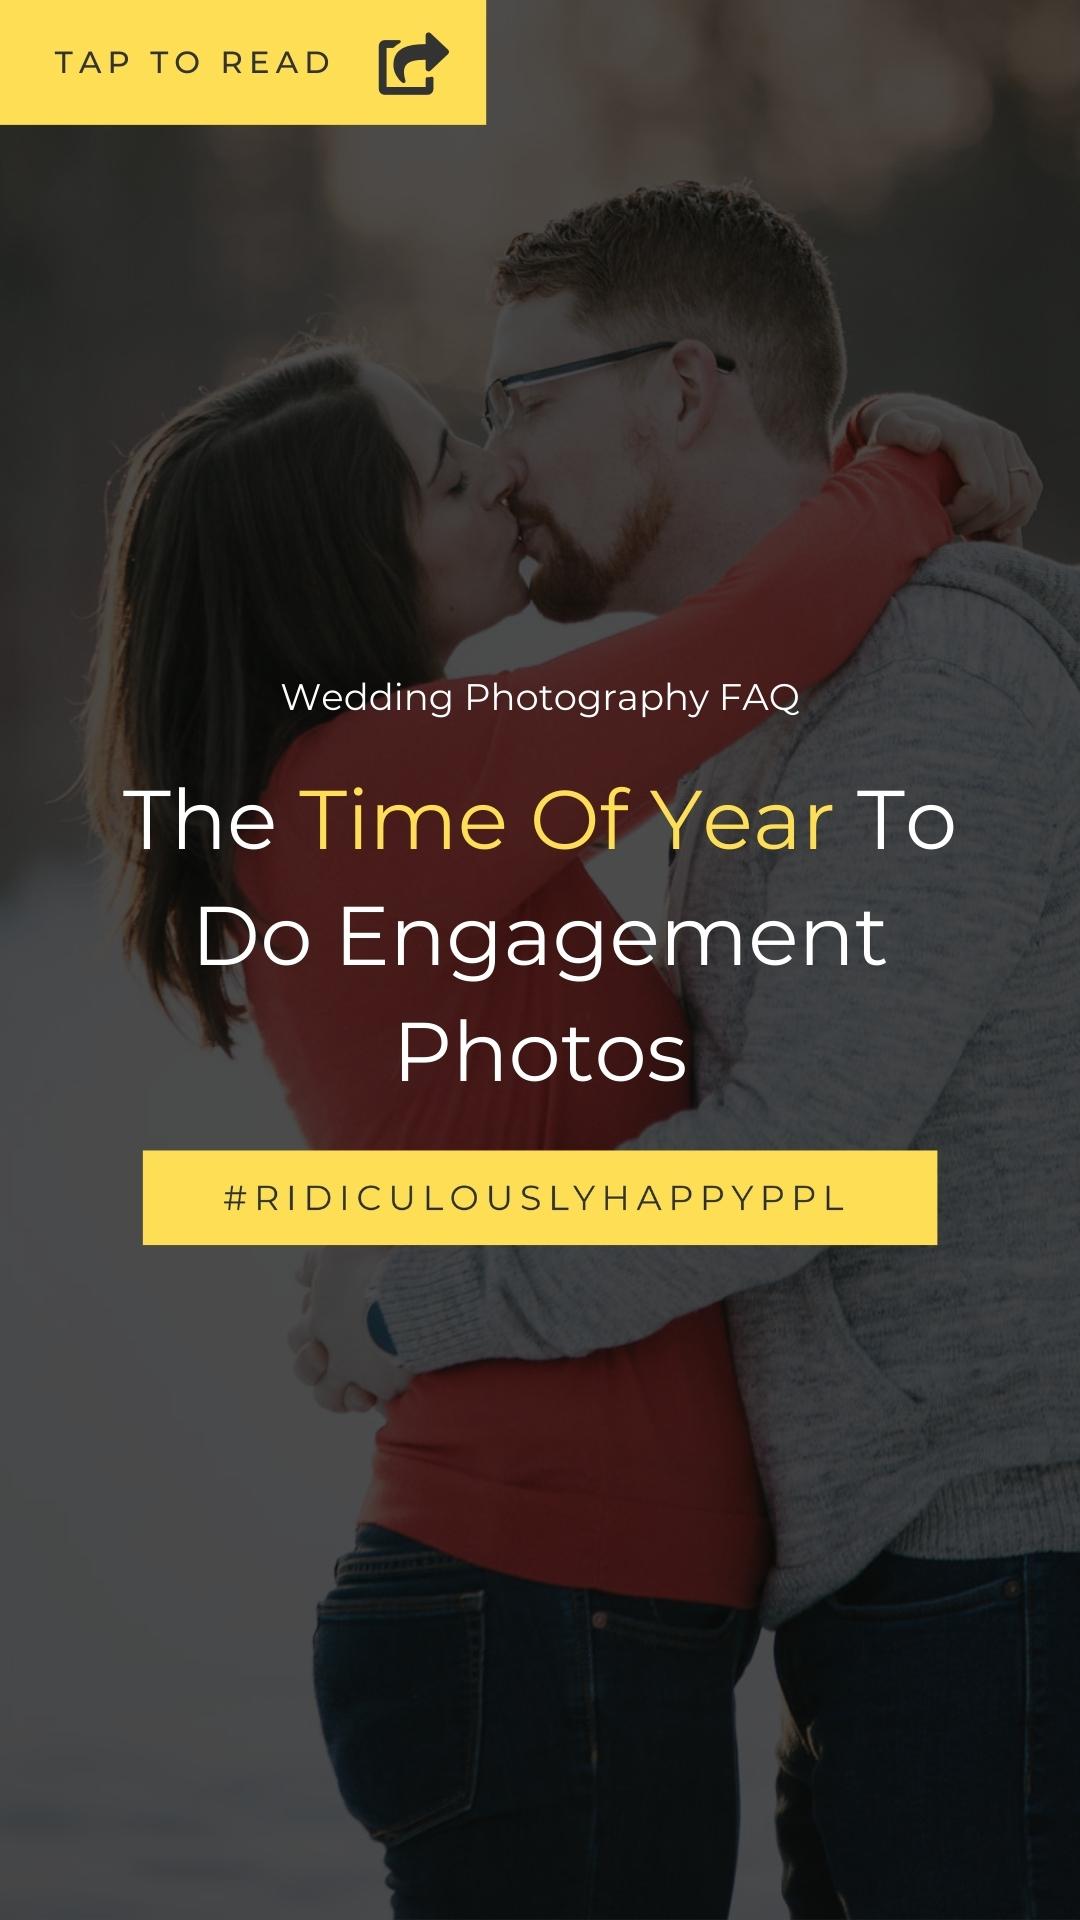 When Should We Do Our Engagement Photos?